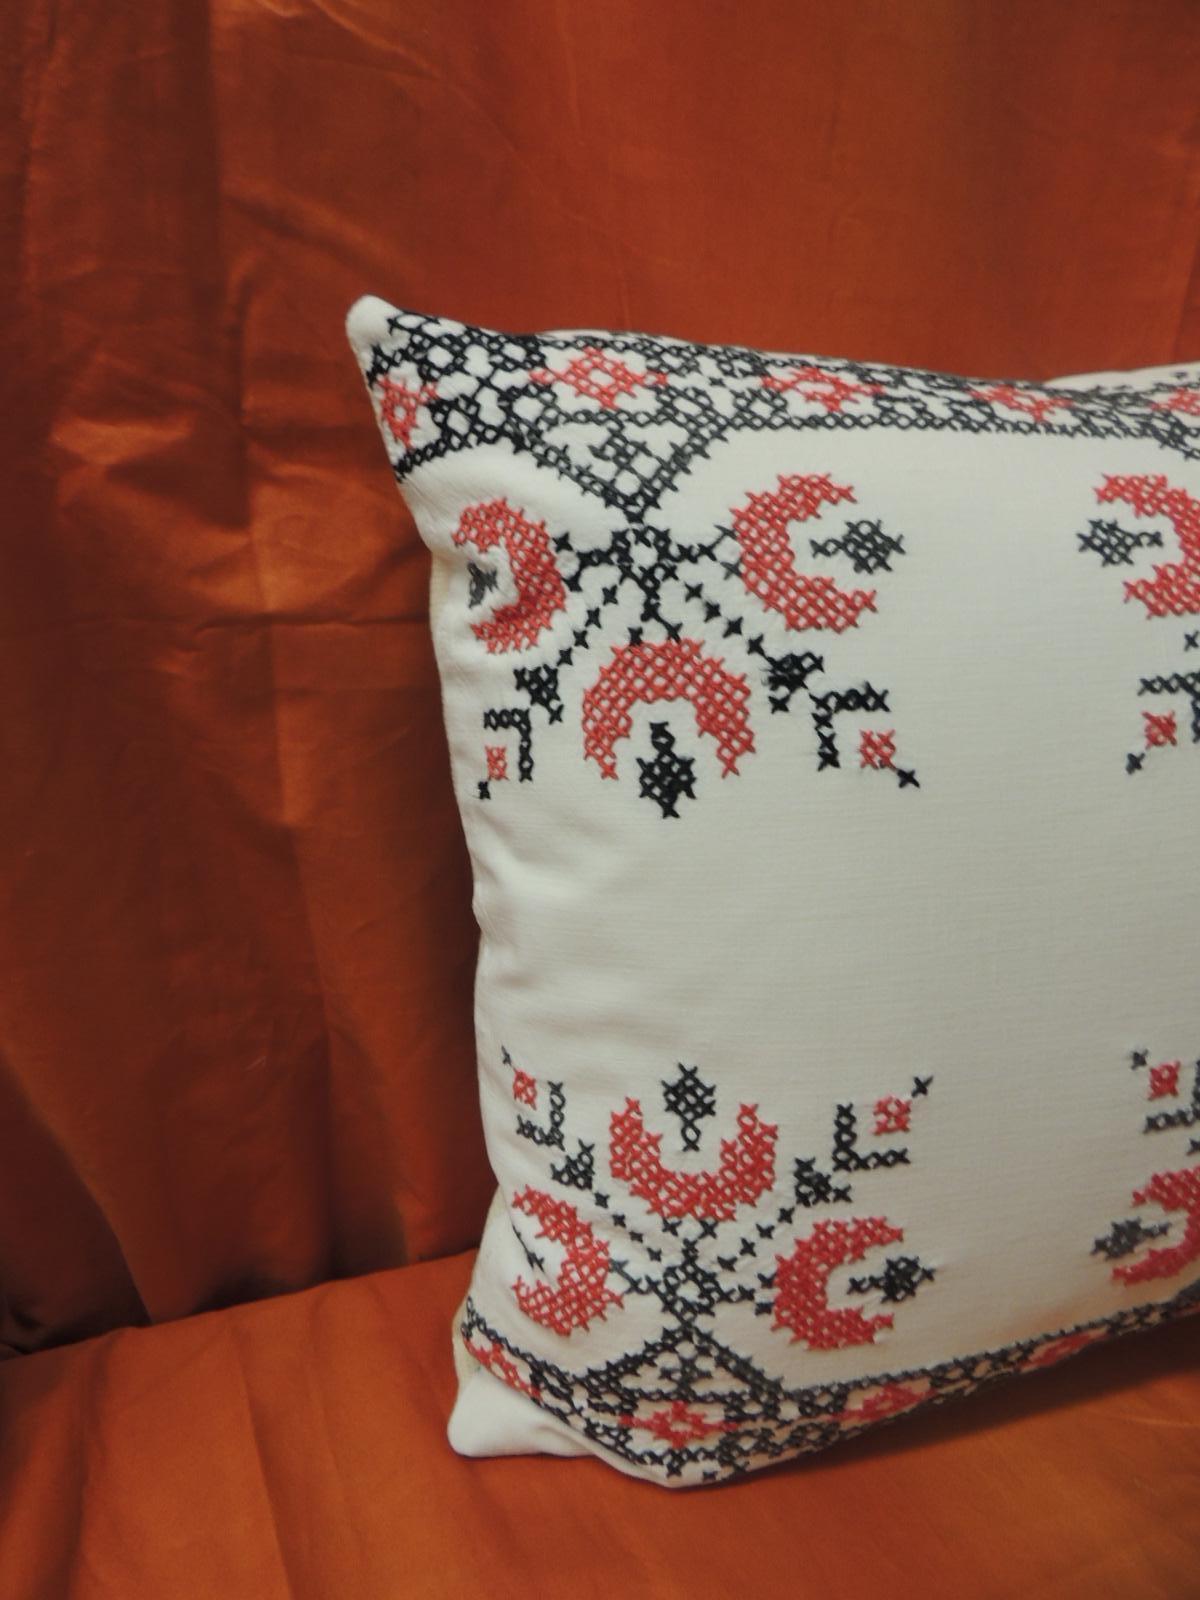 Vintage cross-stitch red, black and white German embroidery decorative pillow.
The textile panel in the front has a red and black embroidery onto a white cotton field. 
The antique embroidery in the front of the accent pillow depicts a bouquet of